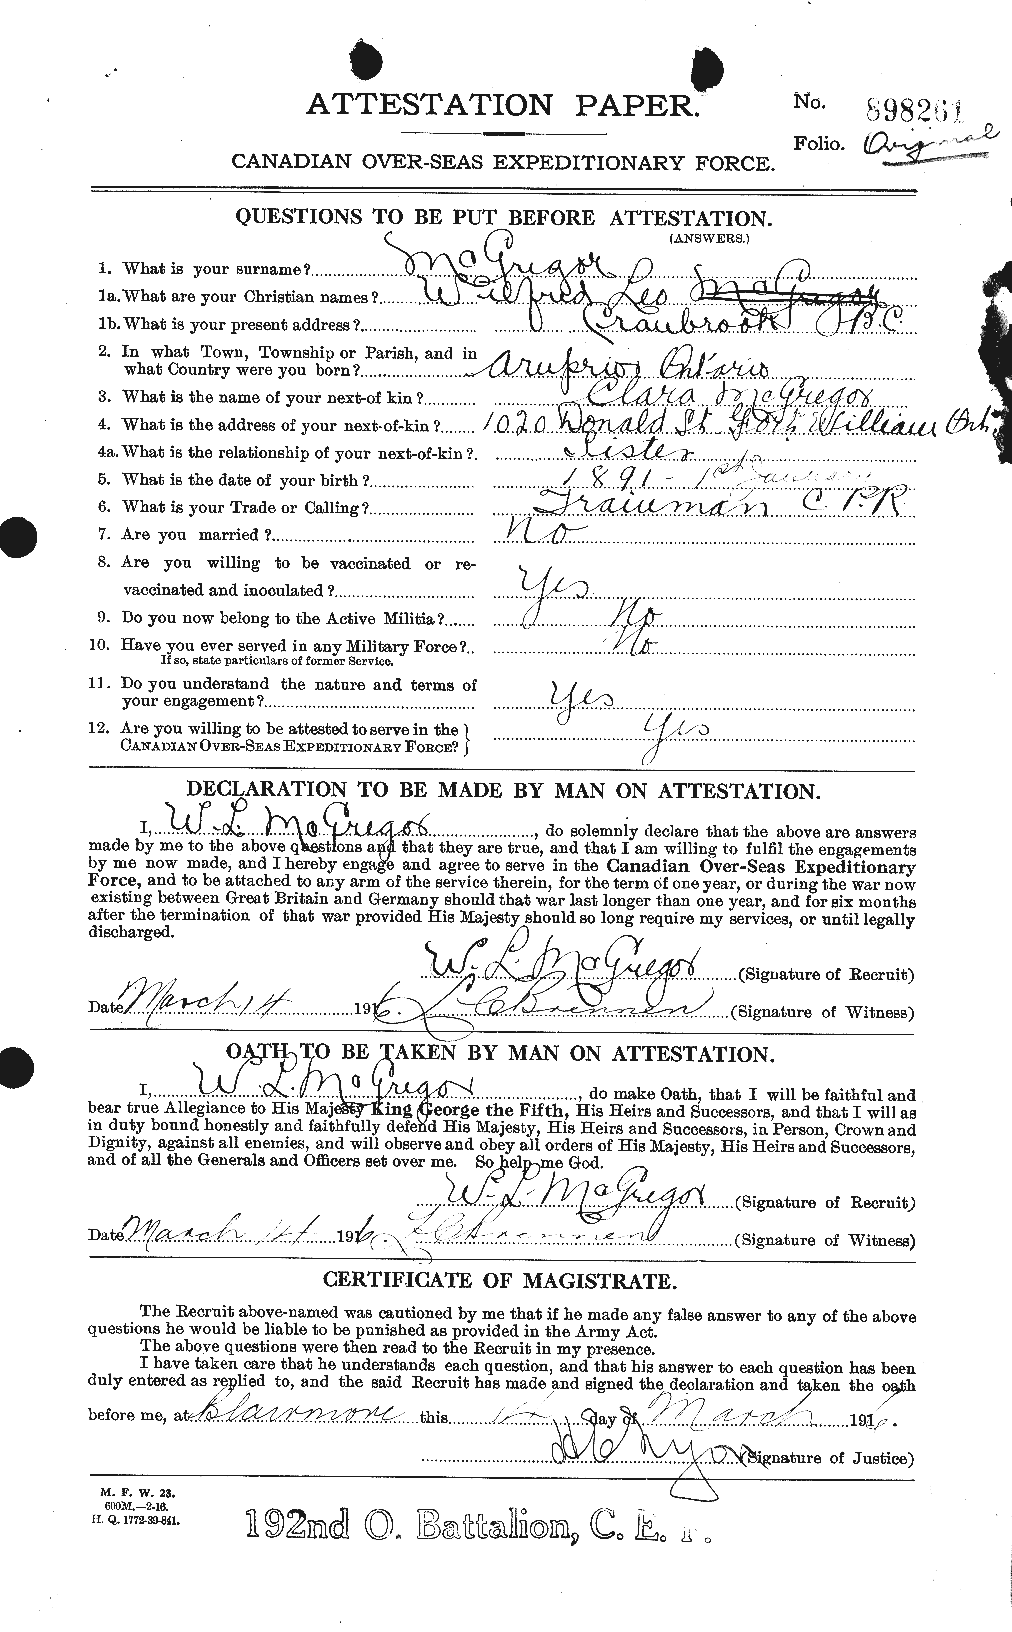 Personnel Records of the First World War - CEF 526239a